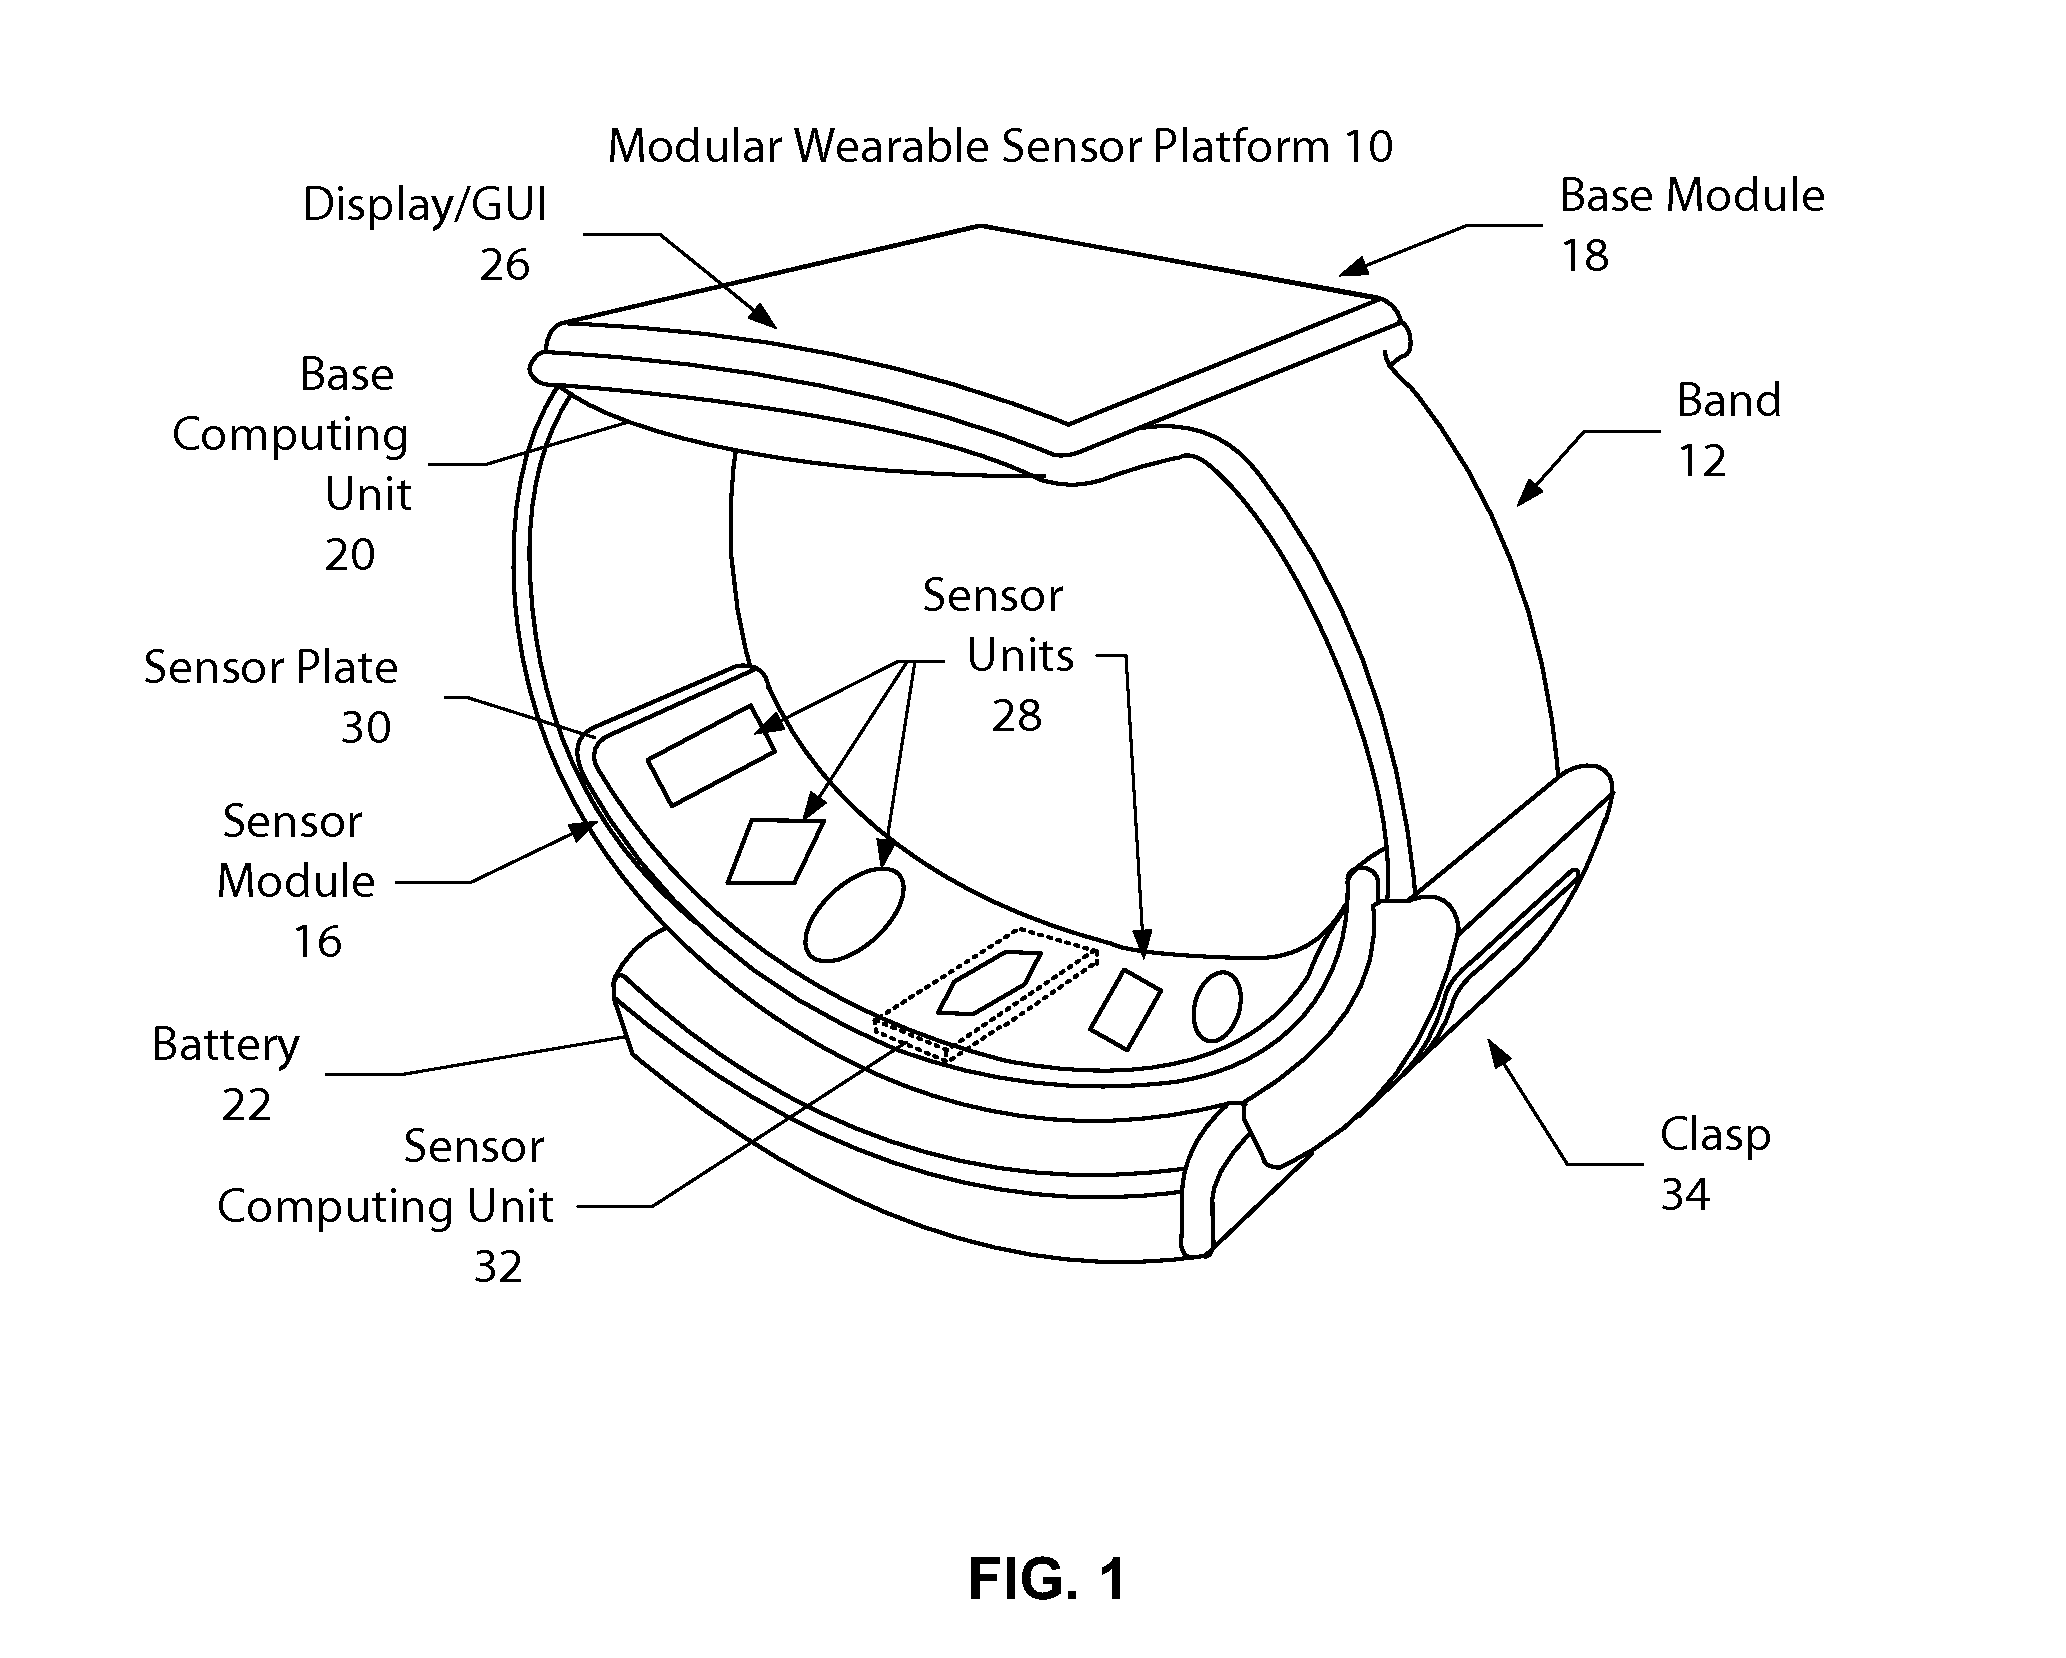 Adjustable sensor support structure for optimizing skin contact